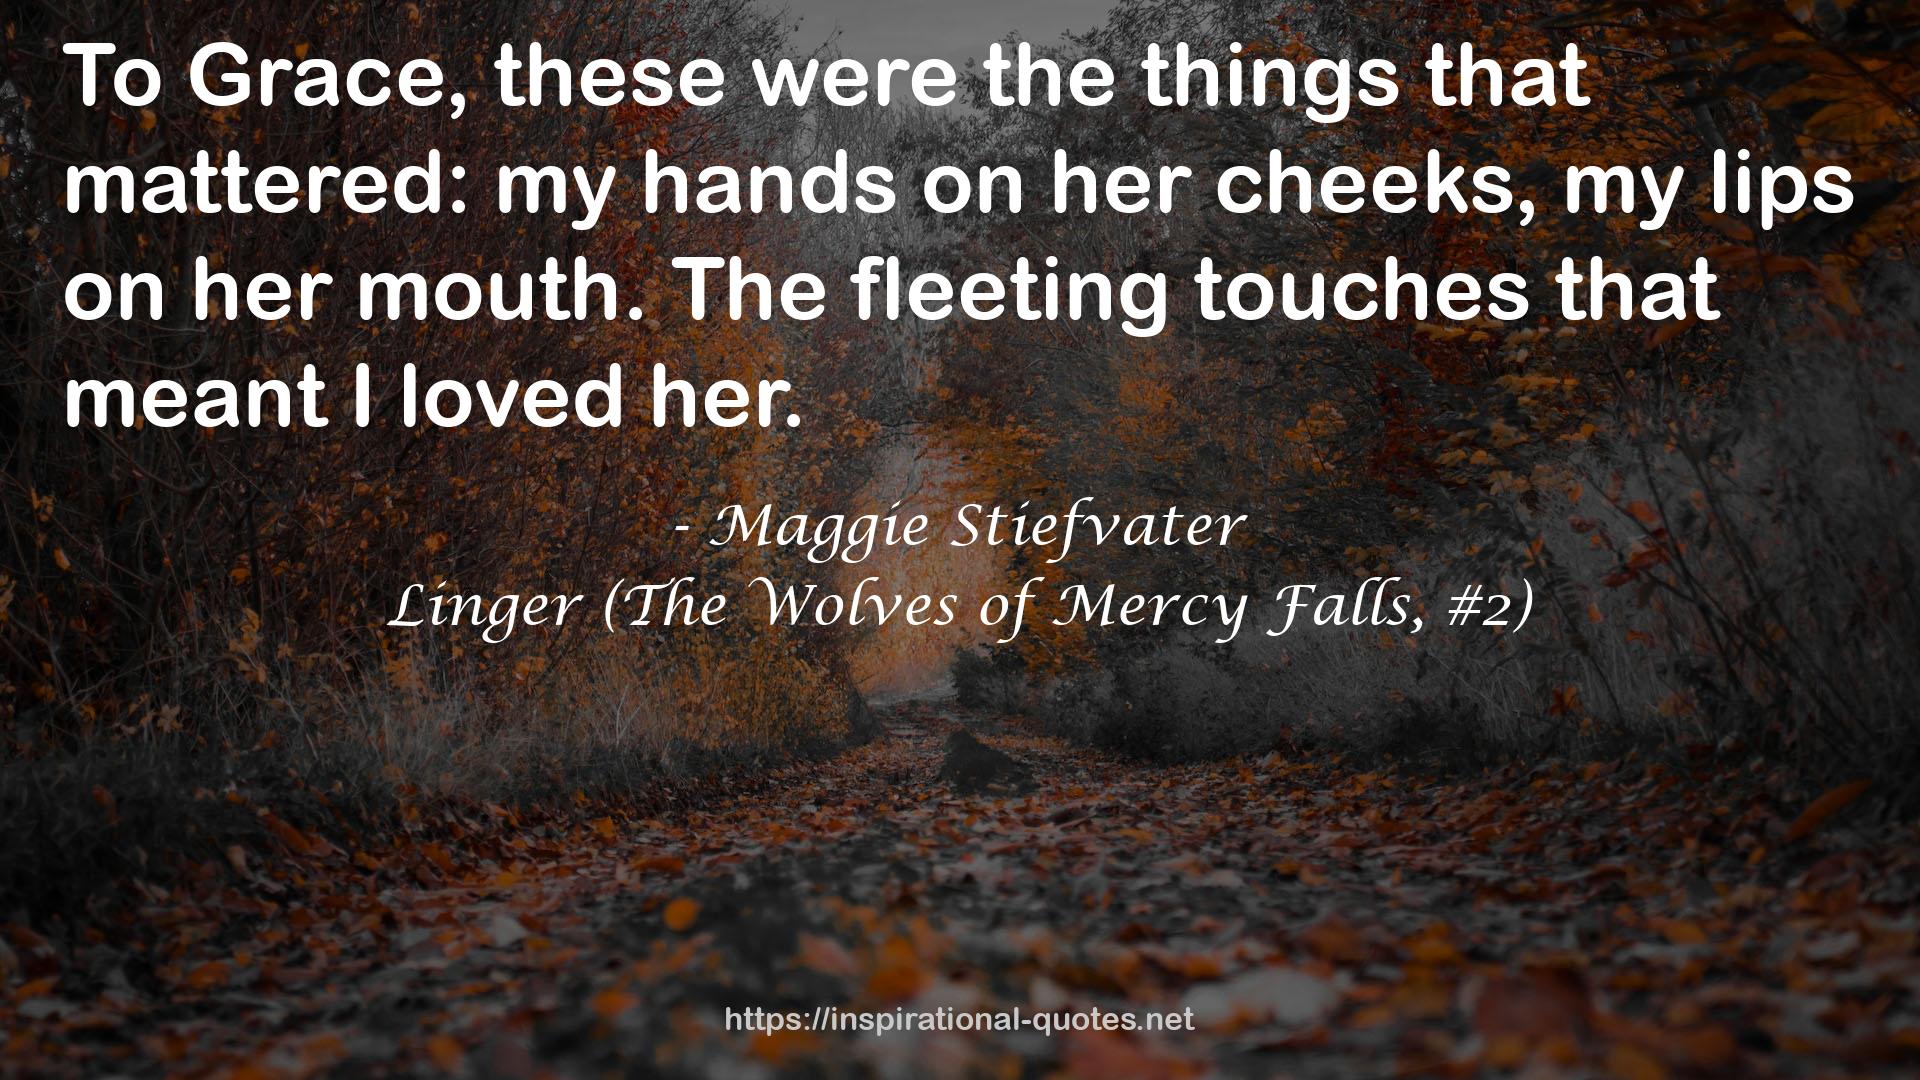 Linger (The Wolves of Mercy Falls, #2) QUOTES